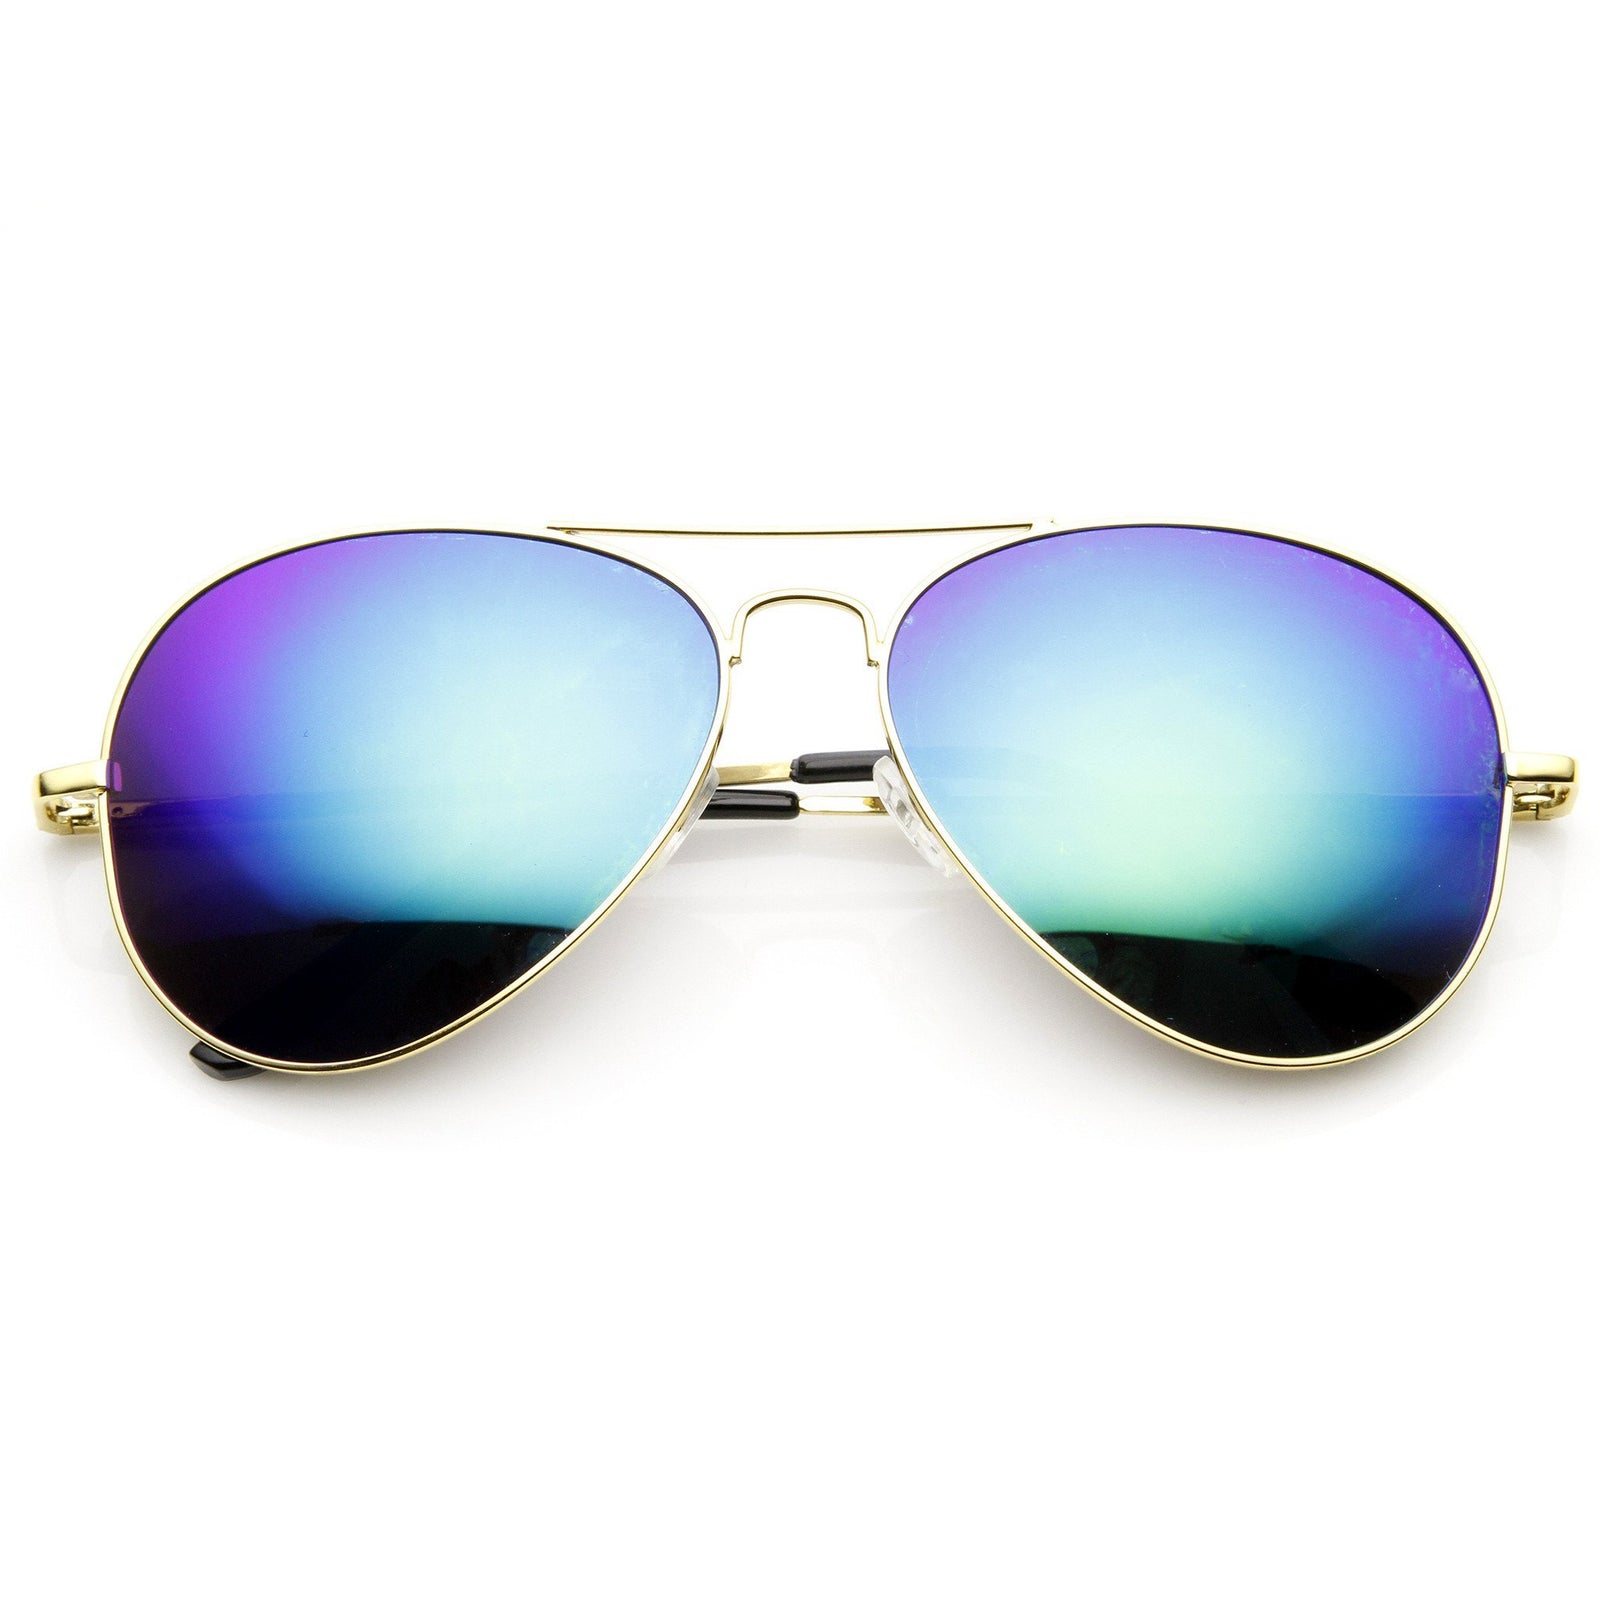 zeroUV - Oversize Metal Frame Thin Temple Color Mirror Flat Lens Aviator Sunglasses 62mm (Silver / Silver Mirror)